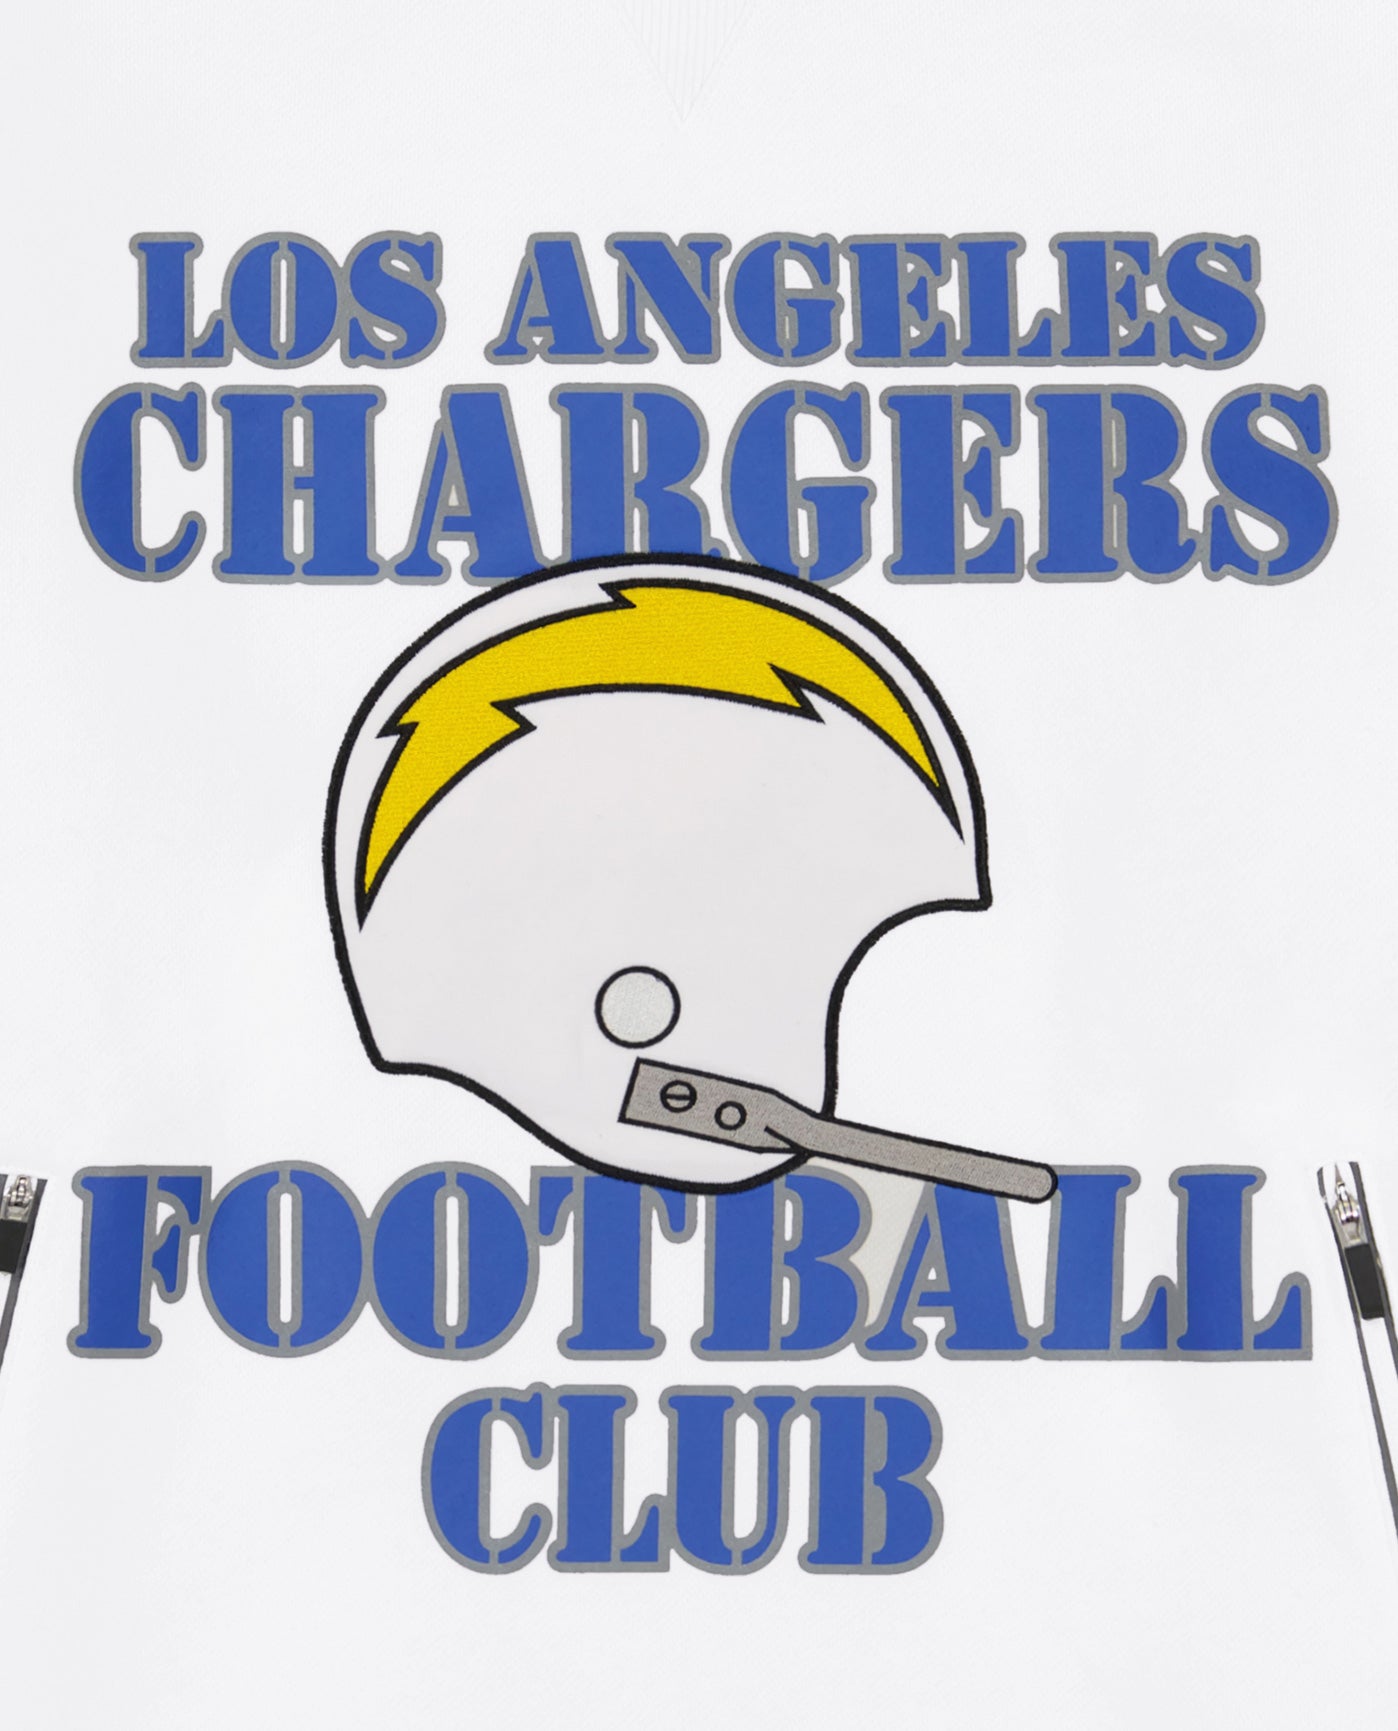 LOS ANGELERS CHARGERS FOOTBALL CLUB helmet logo front | Chargers White